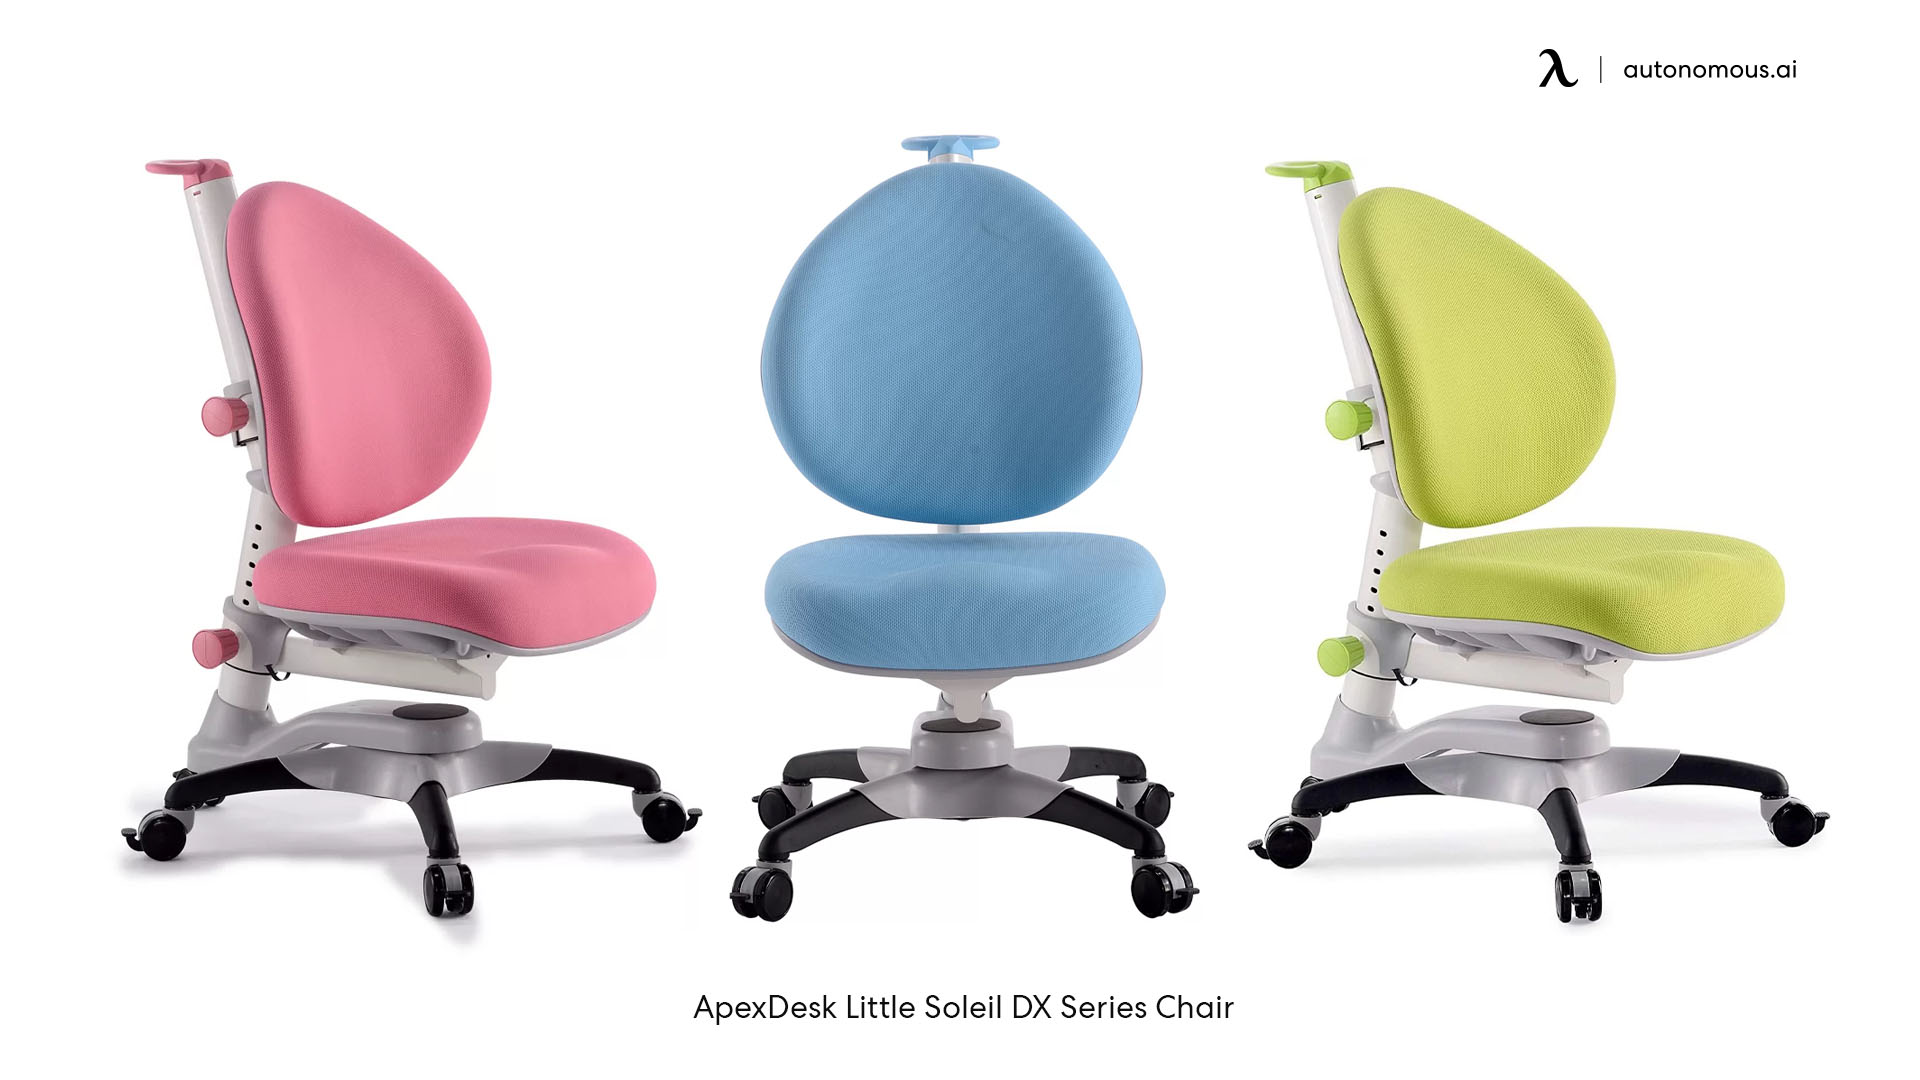 ApexDesk Little Soleil DX Series study chair for kids